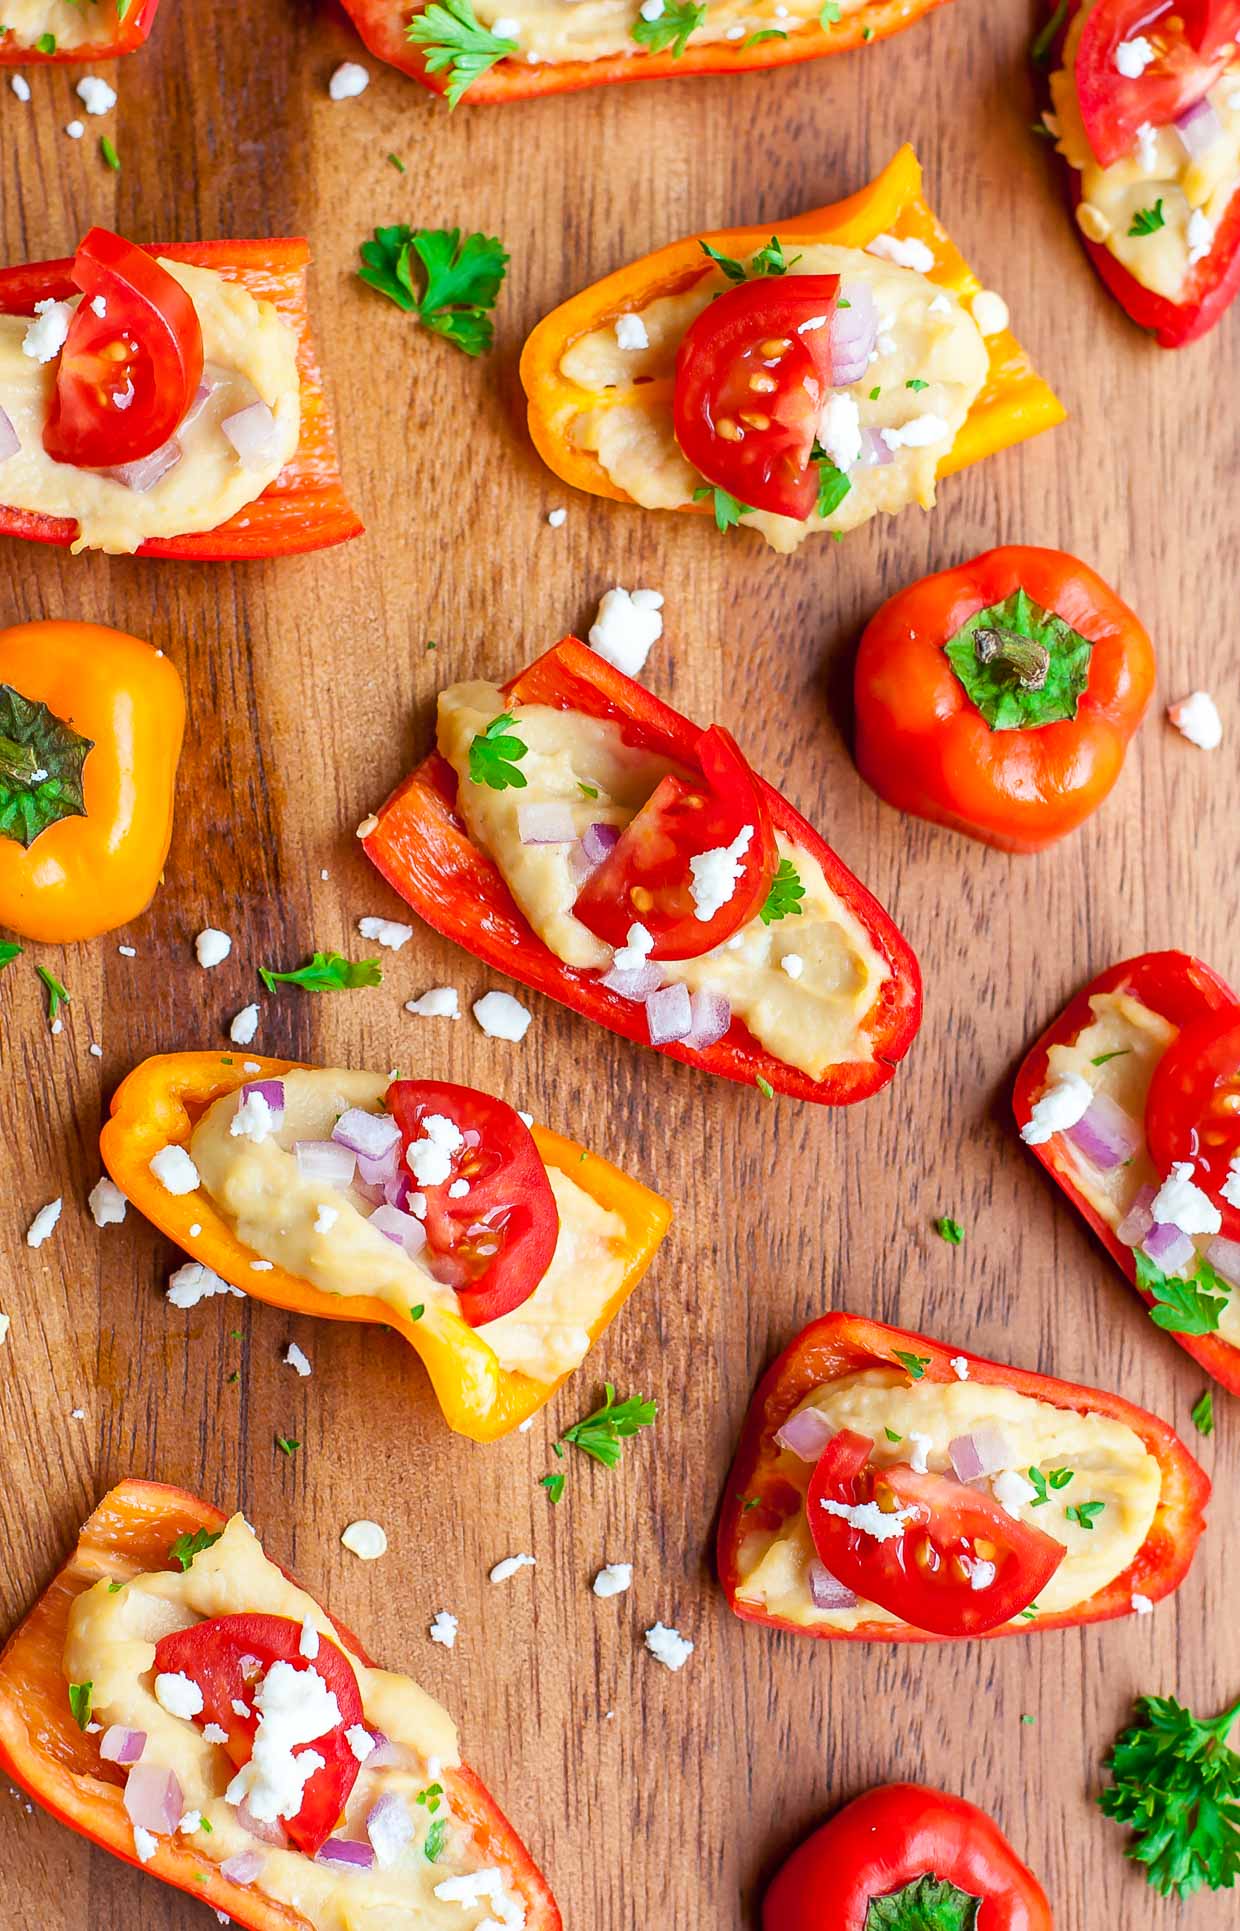 Quick, easy, and totally tasty, these healthy hummus stuffed peppers are sure to be a hit at your next party!